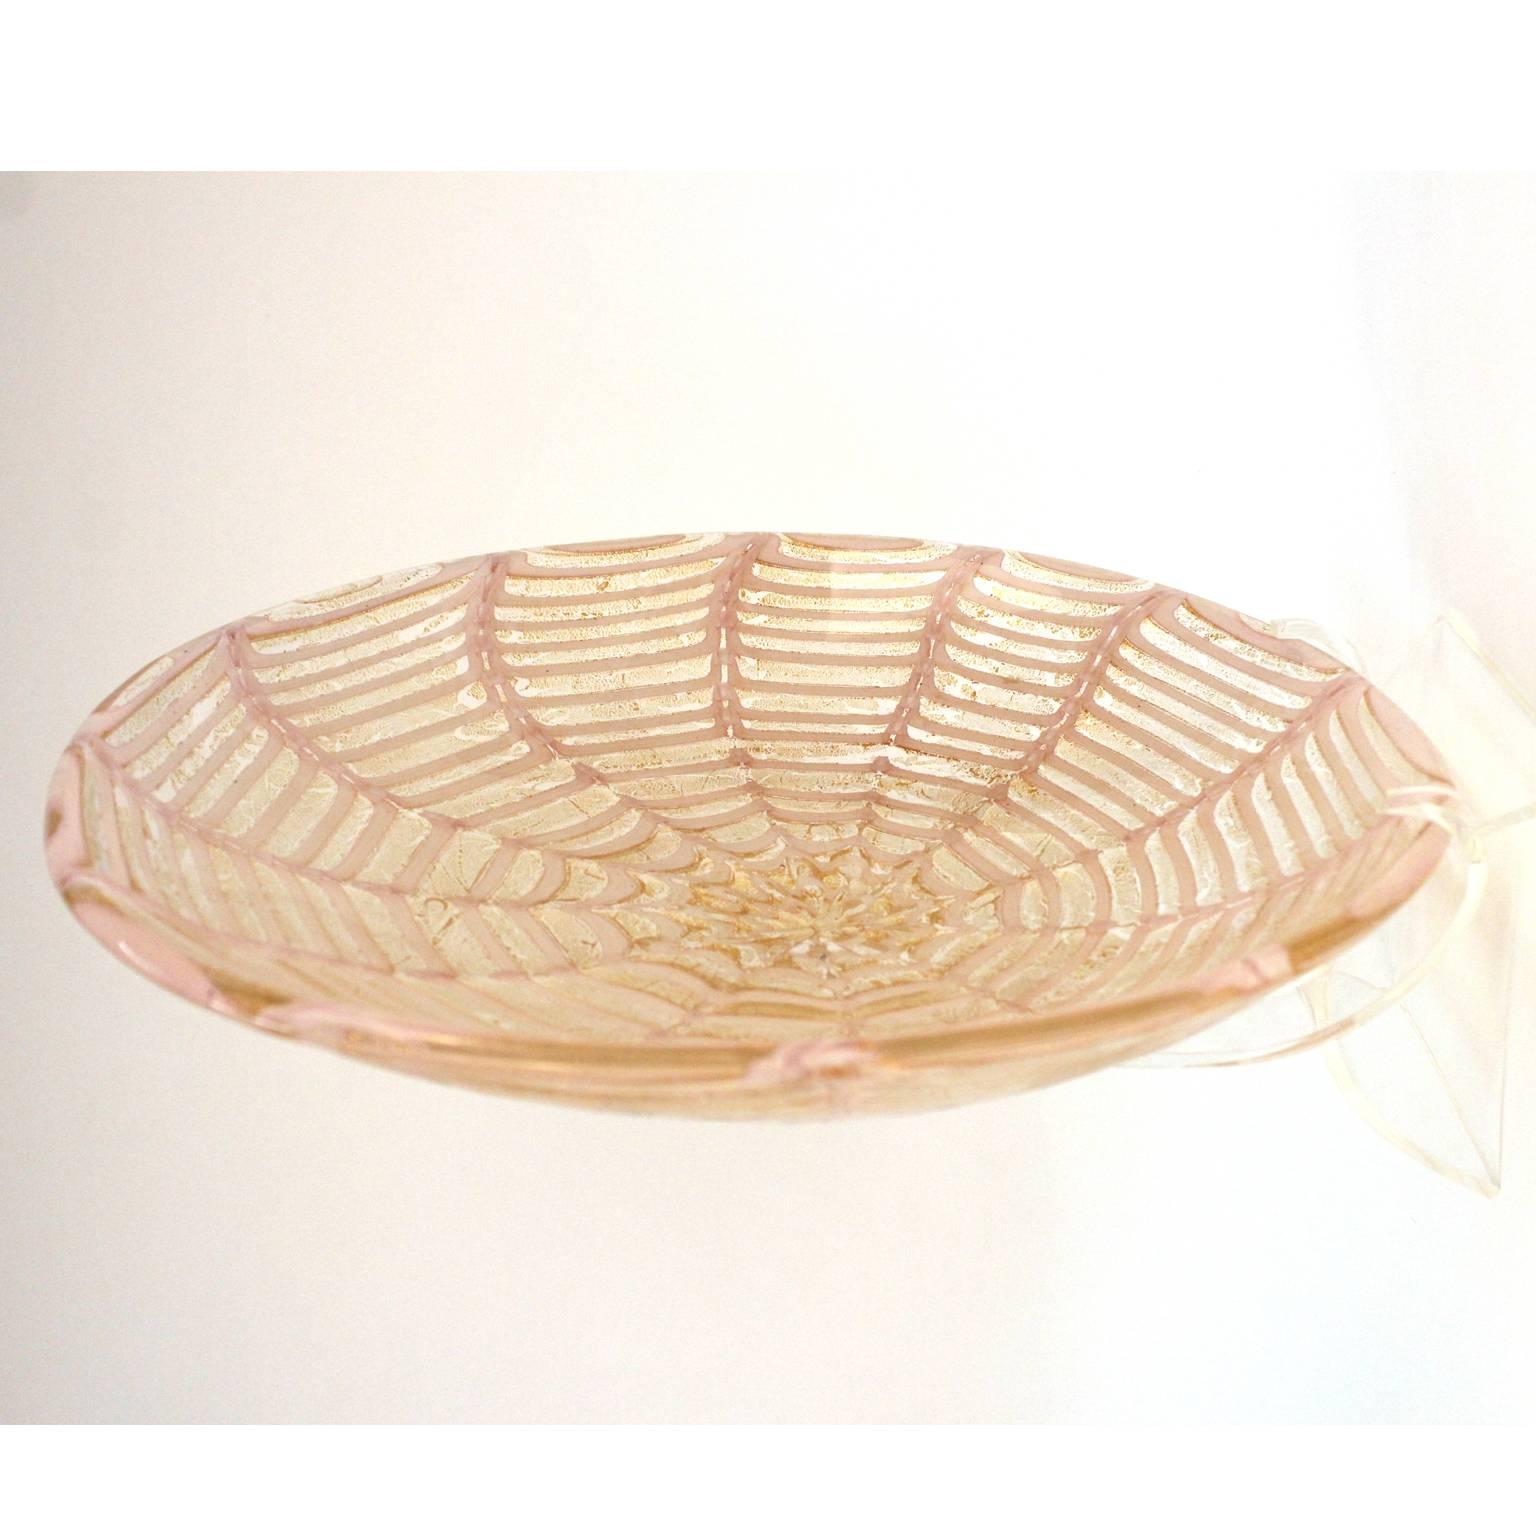 A 1950s Graffito Murano glass charger bowl in pink and 24-karat gold, made by Barovier. Unsigned.